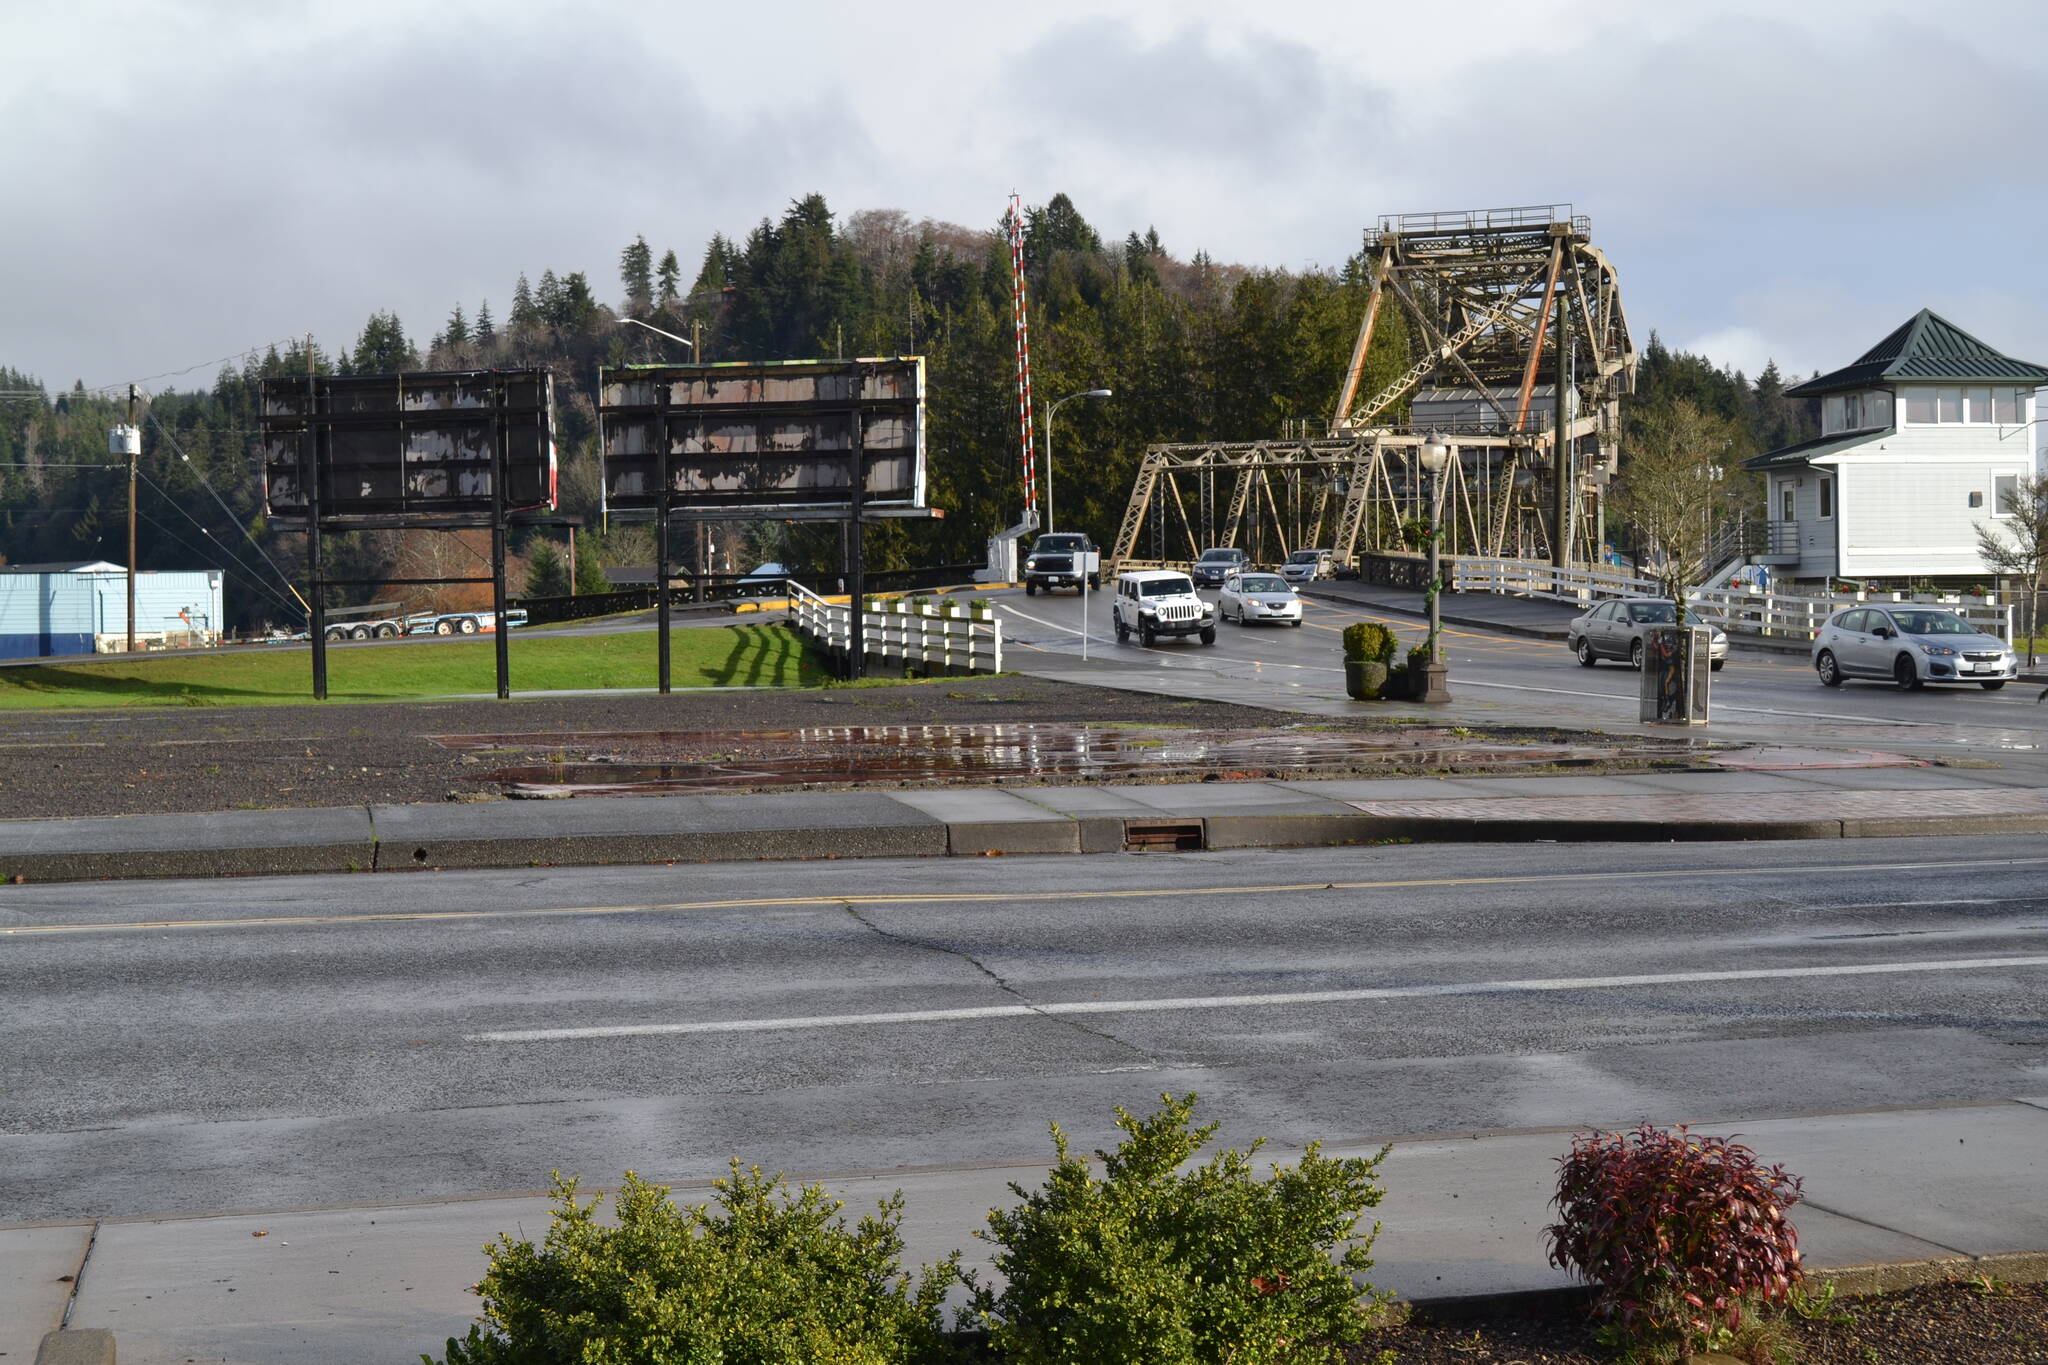 Wyatt Haupt Jr. | The Daily World 
Motor vehicles make their way across Wishkah Street Bridge during a pause in the rain over the weekend on Sunday afternoon, Dec. 12, 2021.